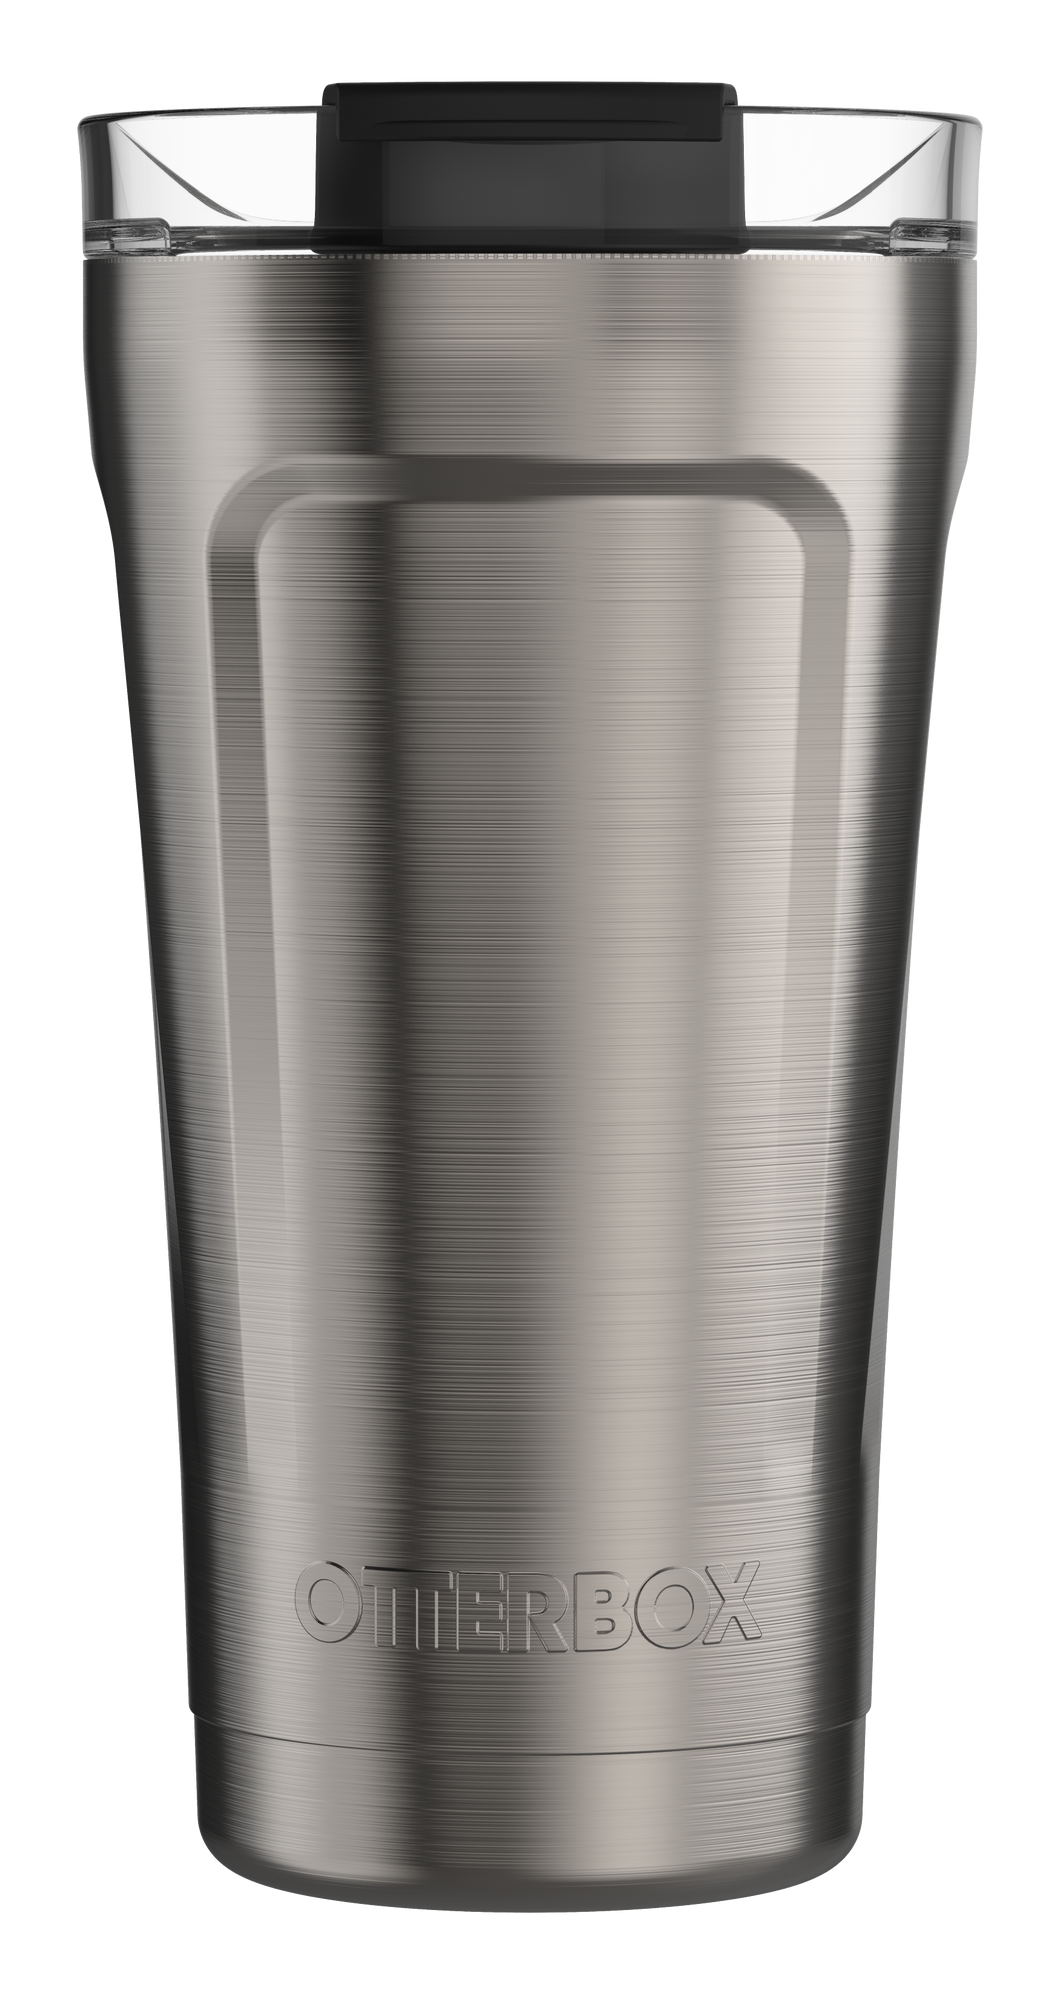 Elevation 16 Tumbler : Stainless Steel